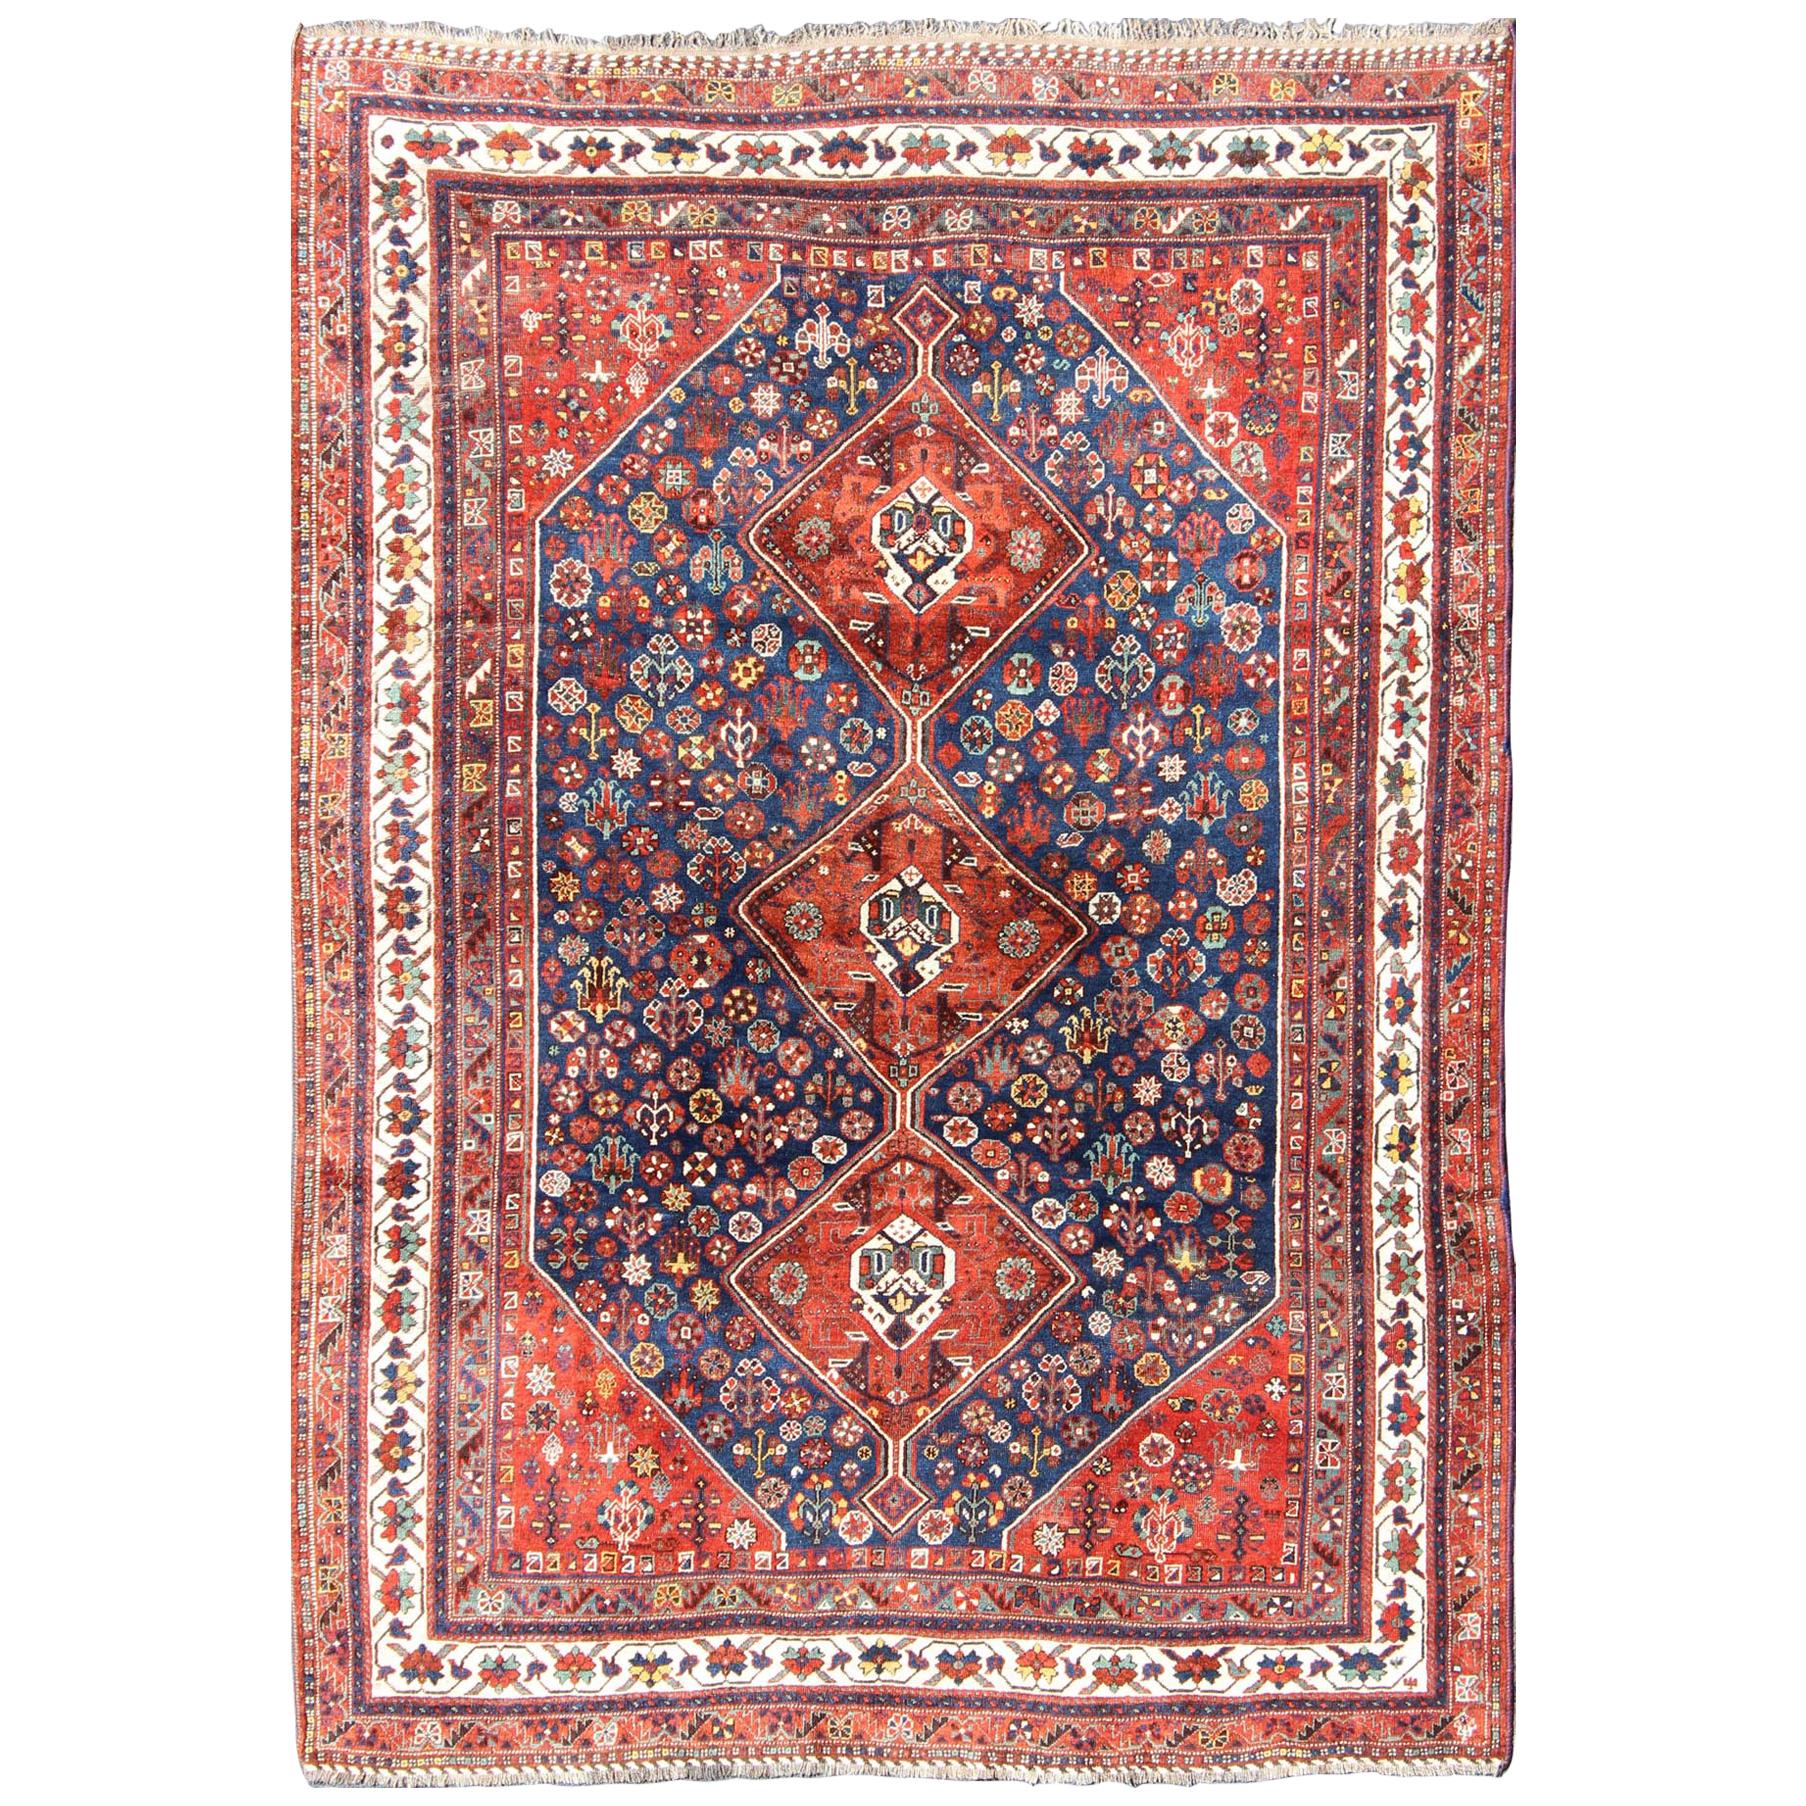 Antique Persian Shiraz Rug with Tri-Medallion Geometrics in Royal Blue and Red